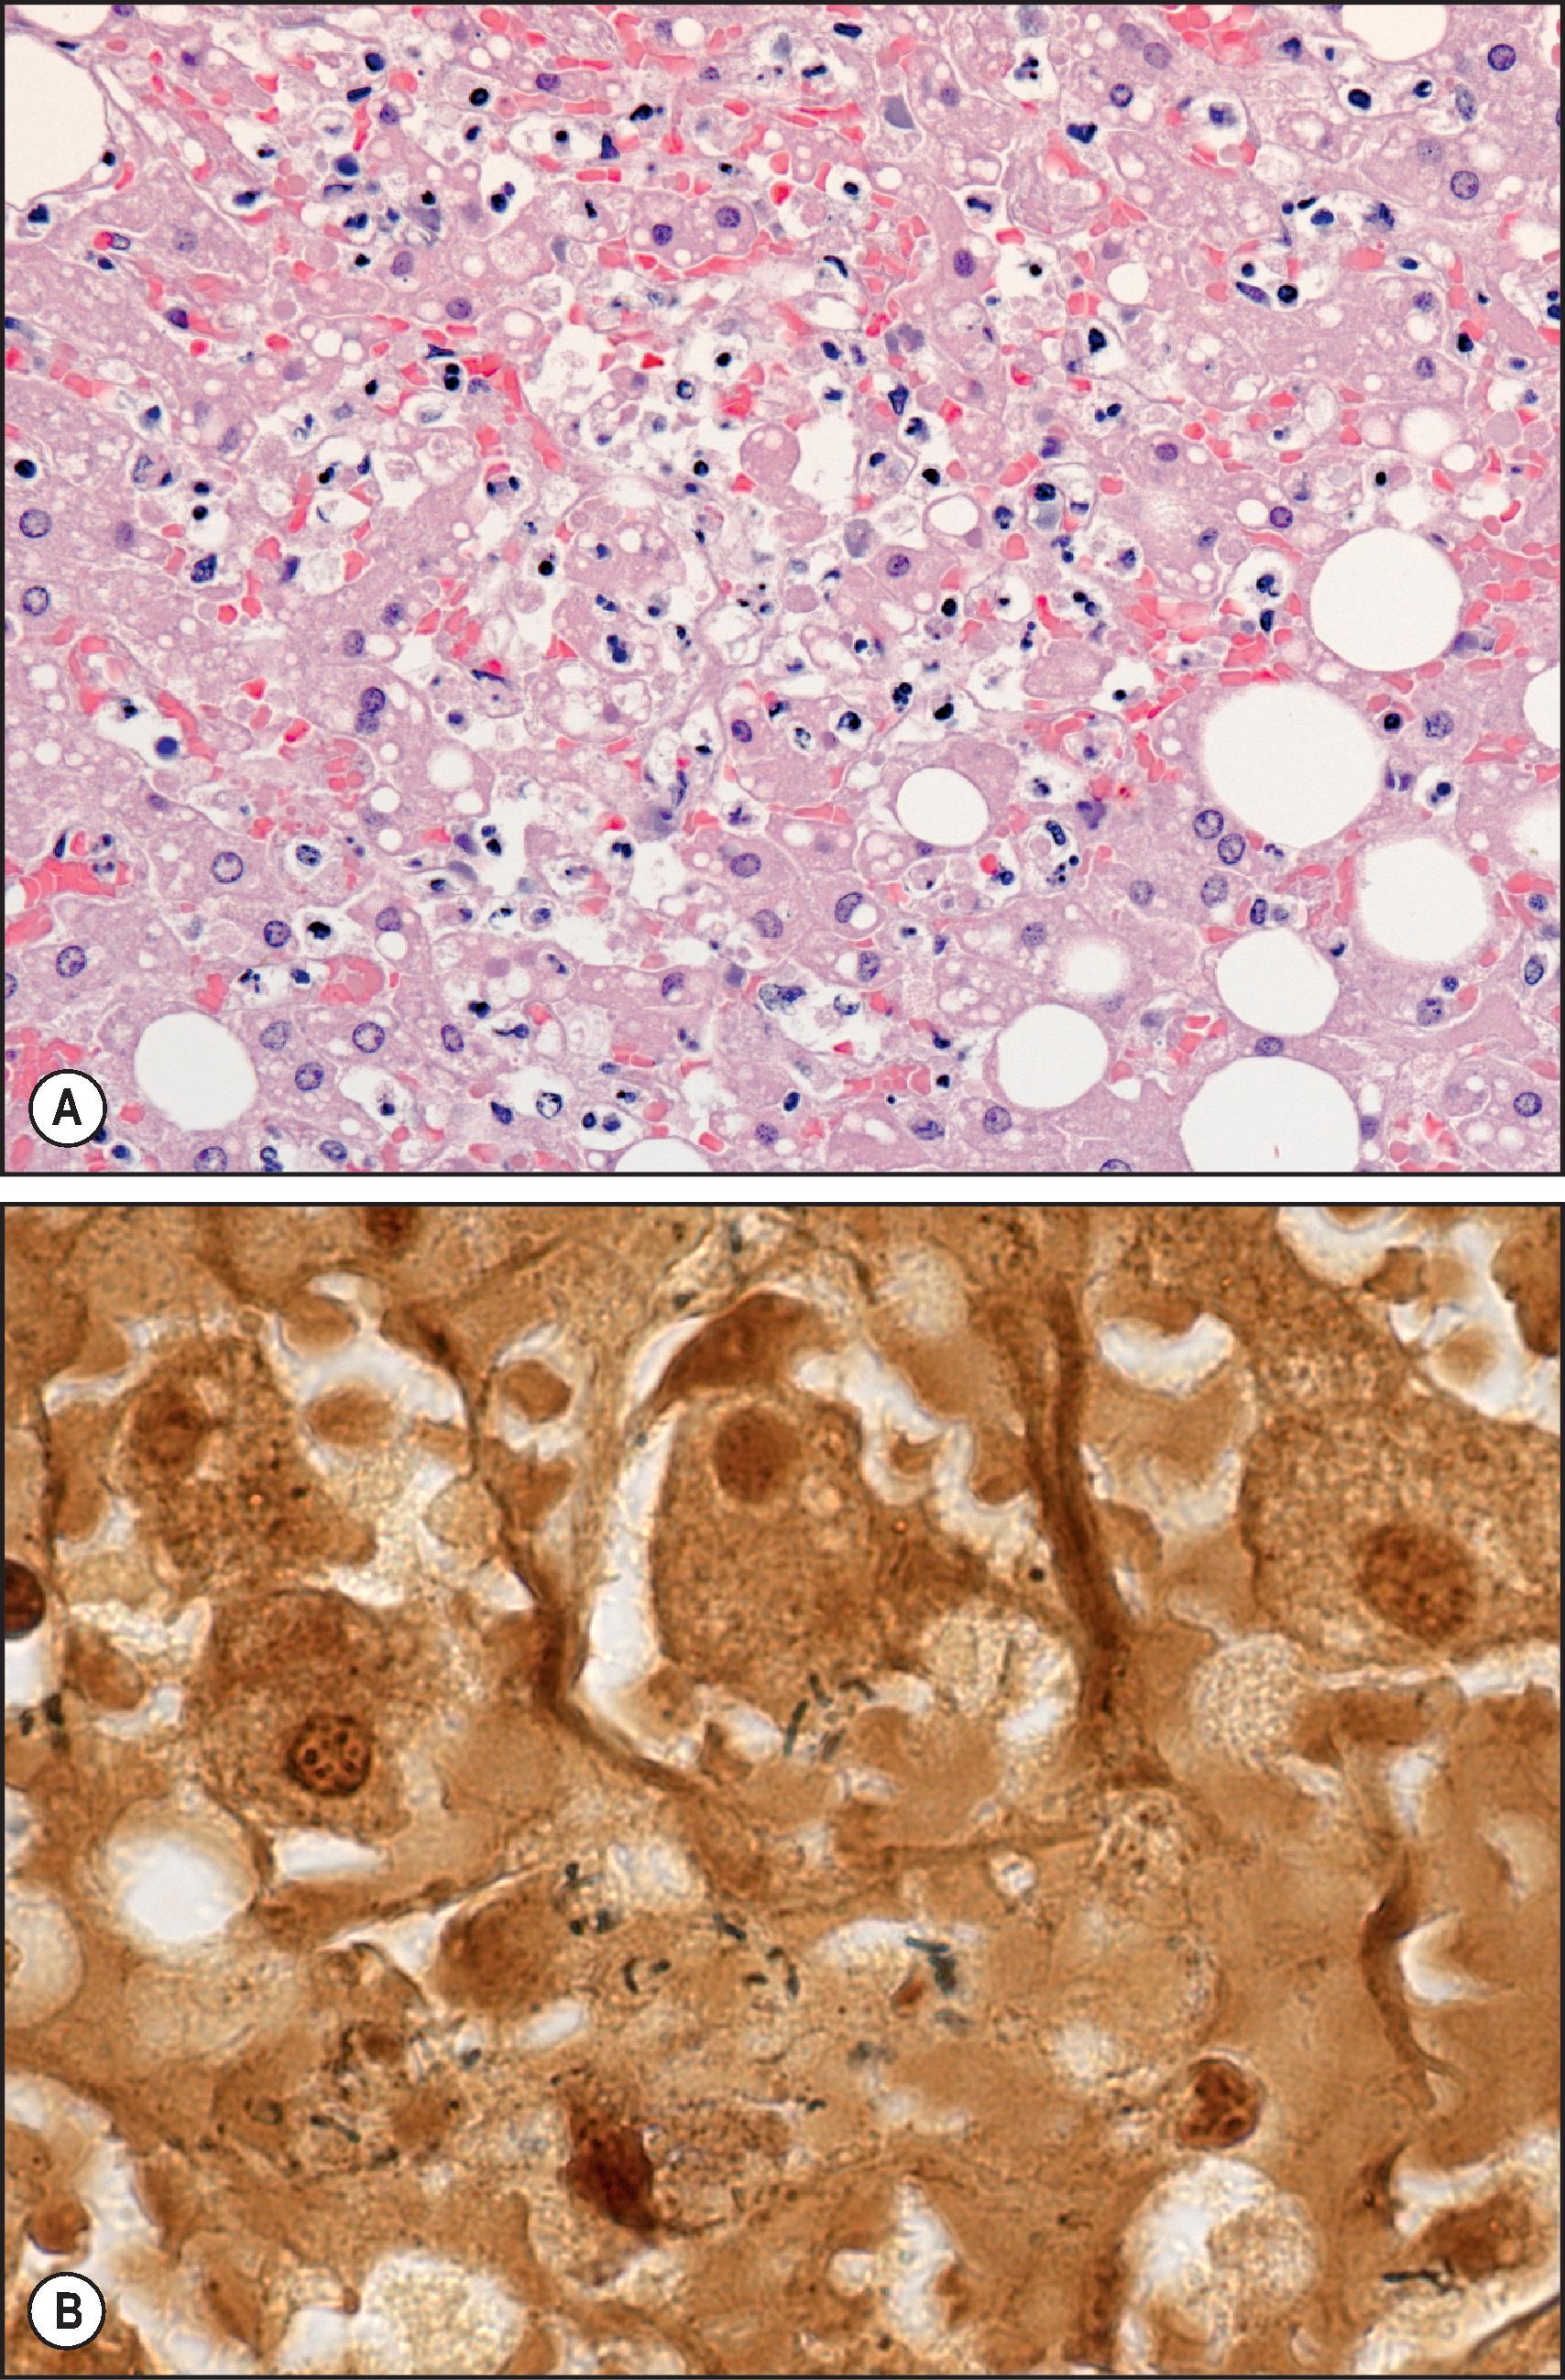 Figure 7.28, Capnocytophaga infection. Fatal case of Capnocytophaga canimorsus infection in an asplenic patient with a history of a dog bite. (A) Low-power photomicrograph of the liver shows focal necrosis and aggregate of predominantly acute inflammatory cell. (H&E stain.) (B) Multiple bacilli are seen in this silver stain (Steiner). Diagnosis of the infection was by polymerase chain reaction from formalin-fixed paraffin-embedded tissue.